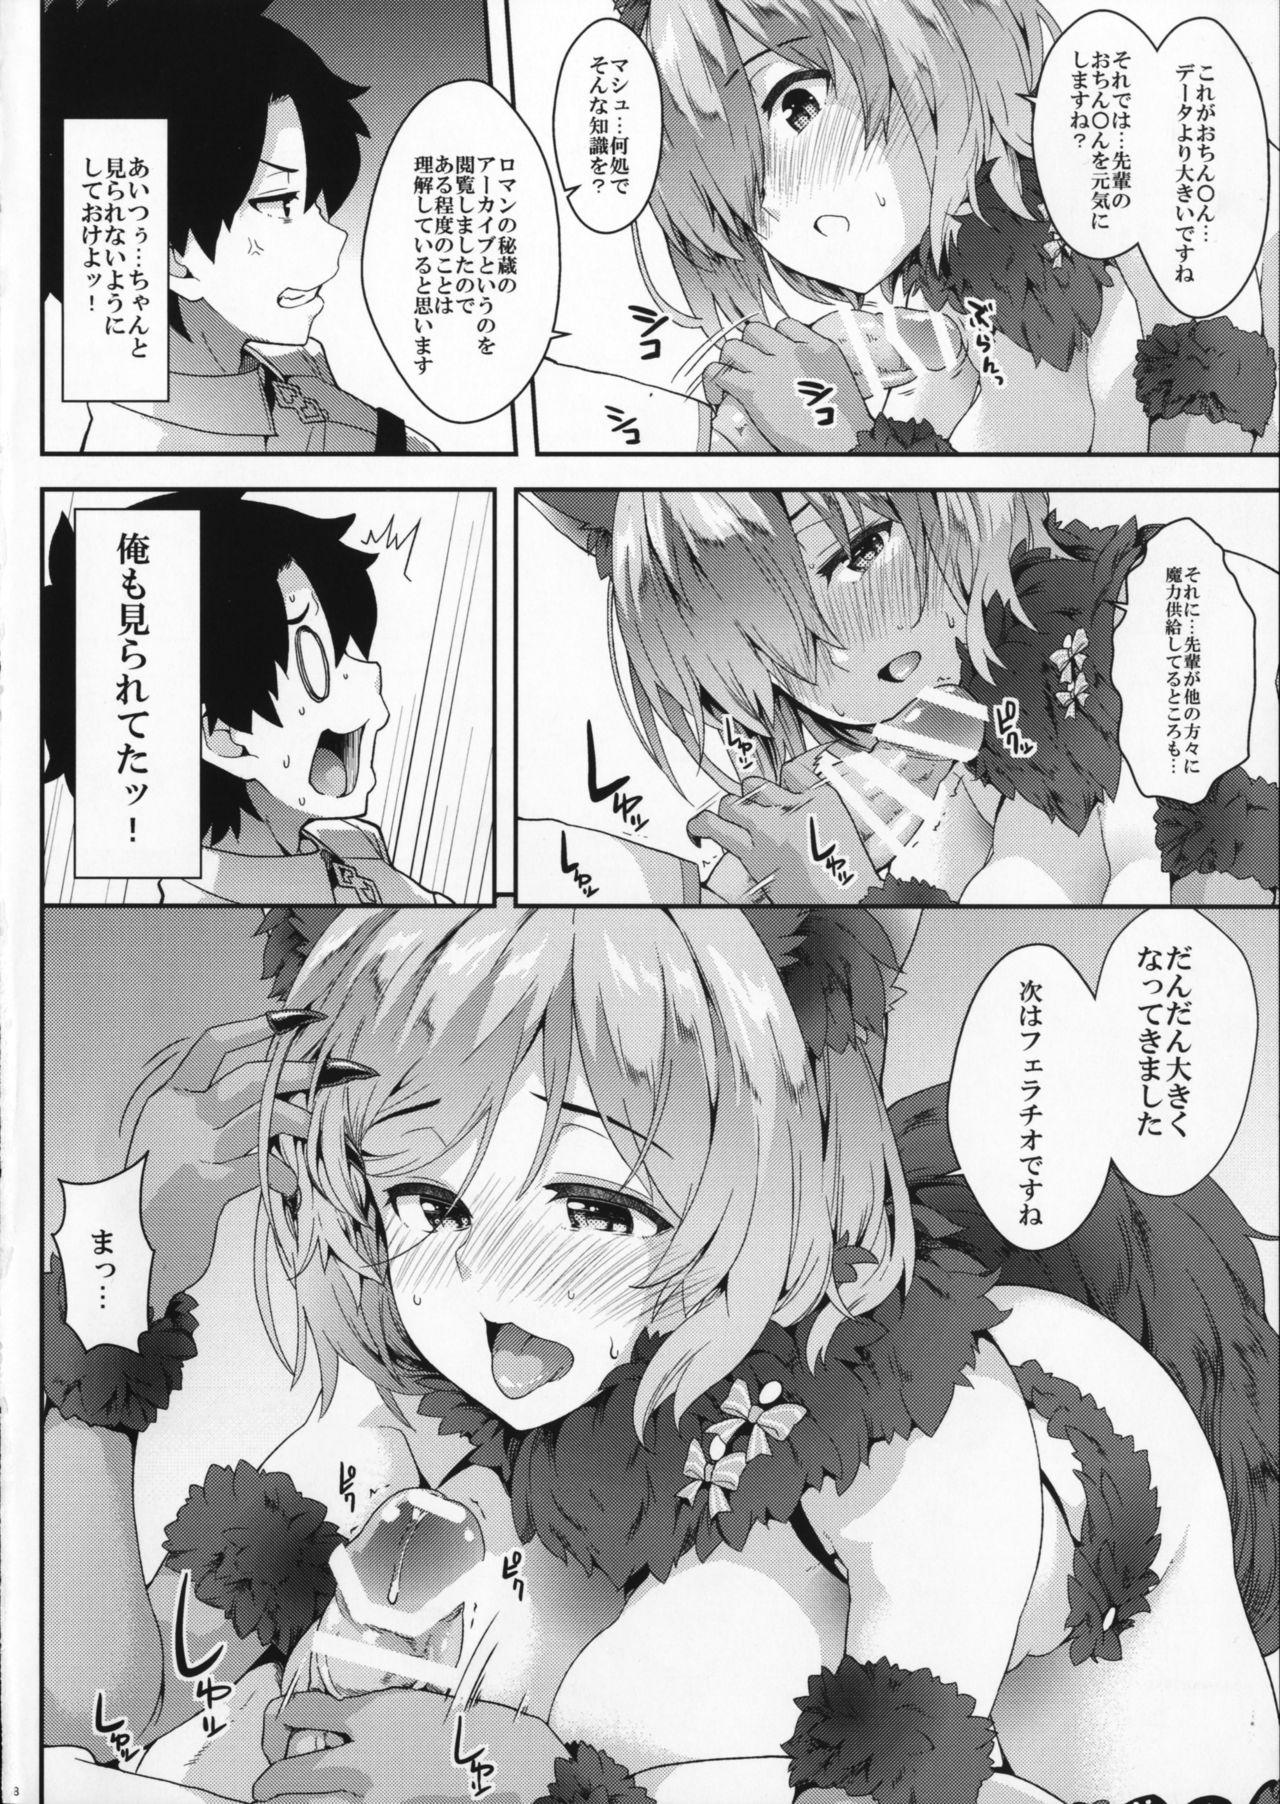 Long Hair Why am I jealous of you? - Fate grand order Sexteen - Page 7